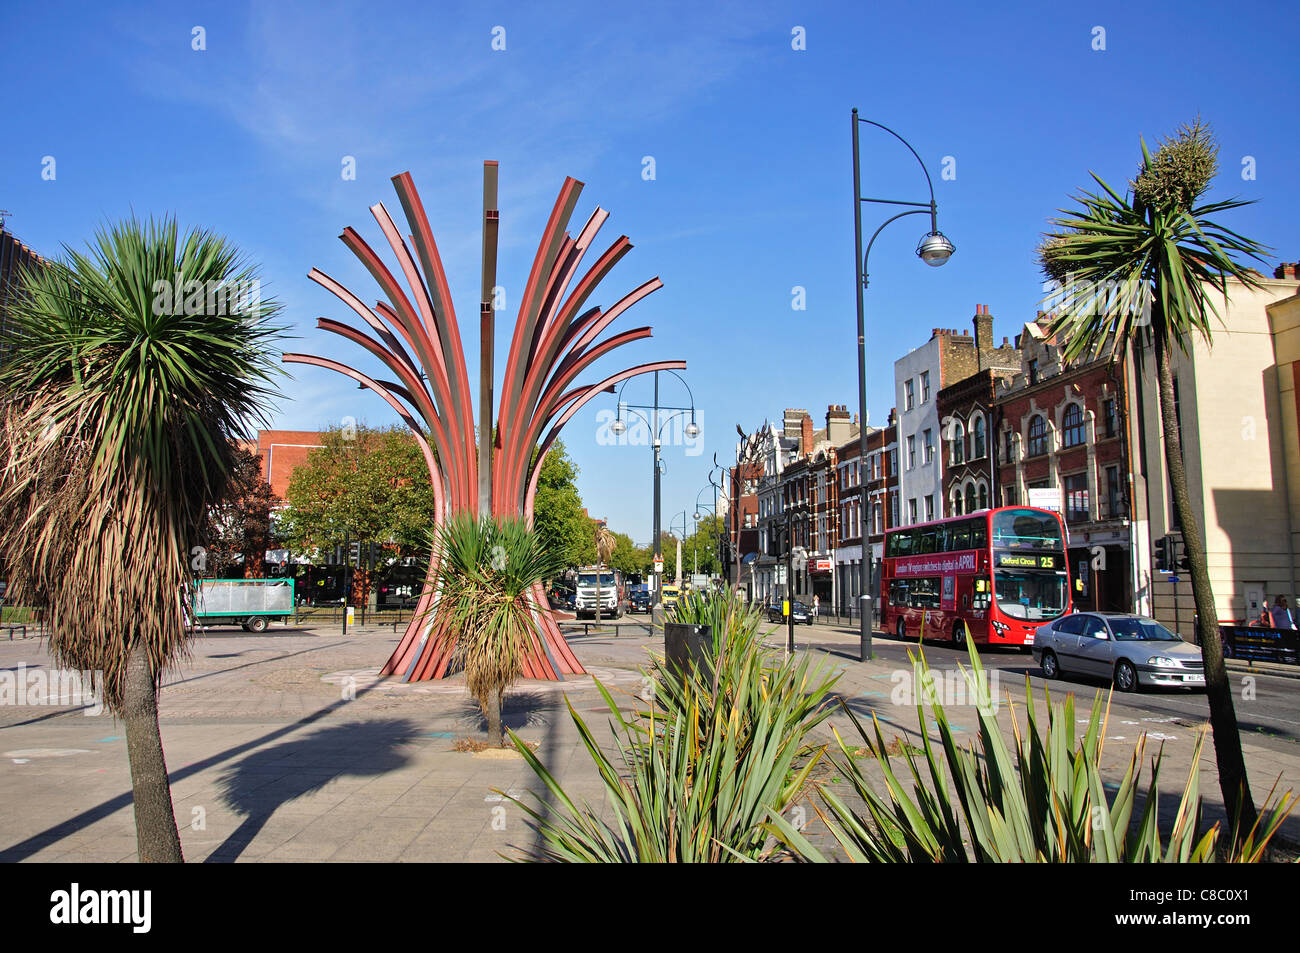 'Arbre' Fer sculpture, High Street, Stratford, Newham Borough, London, Greater London, Angleterre, Royaume-Uni Banque D'Images